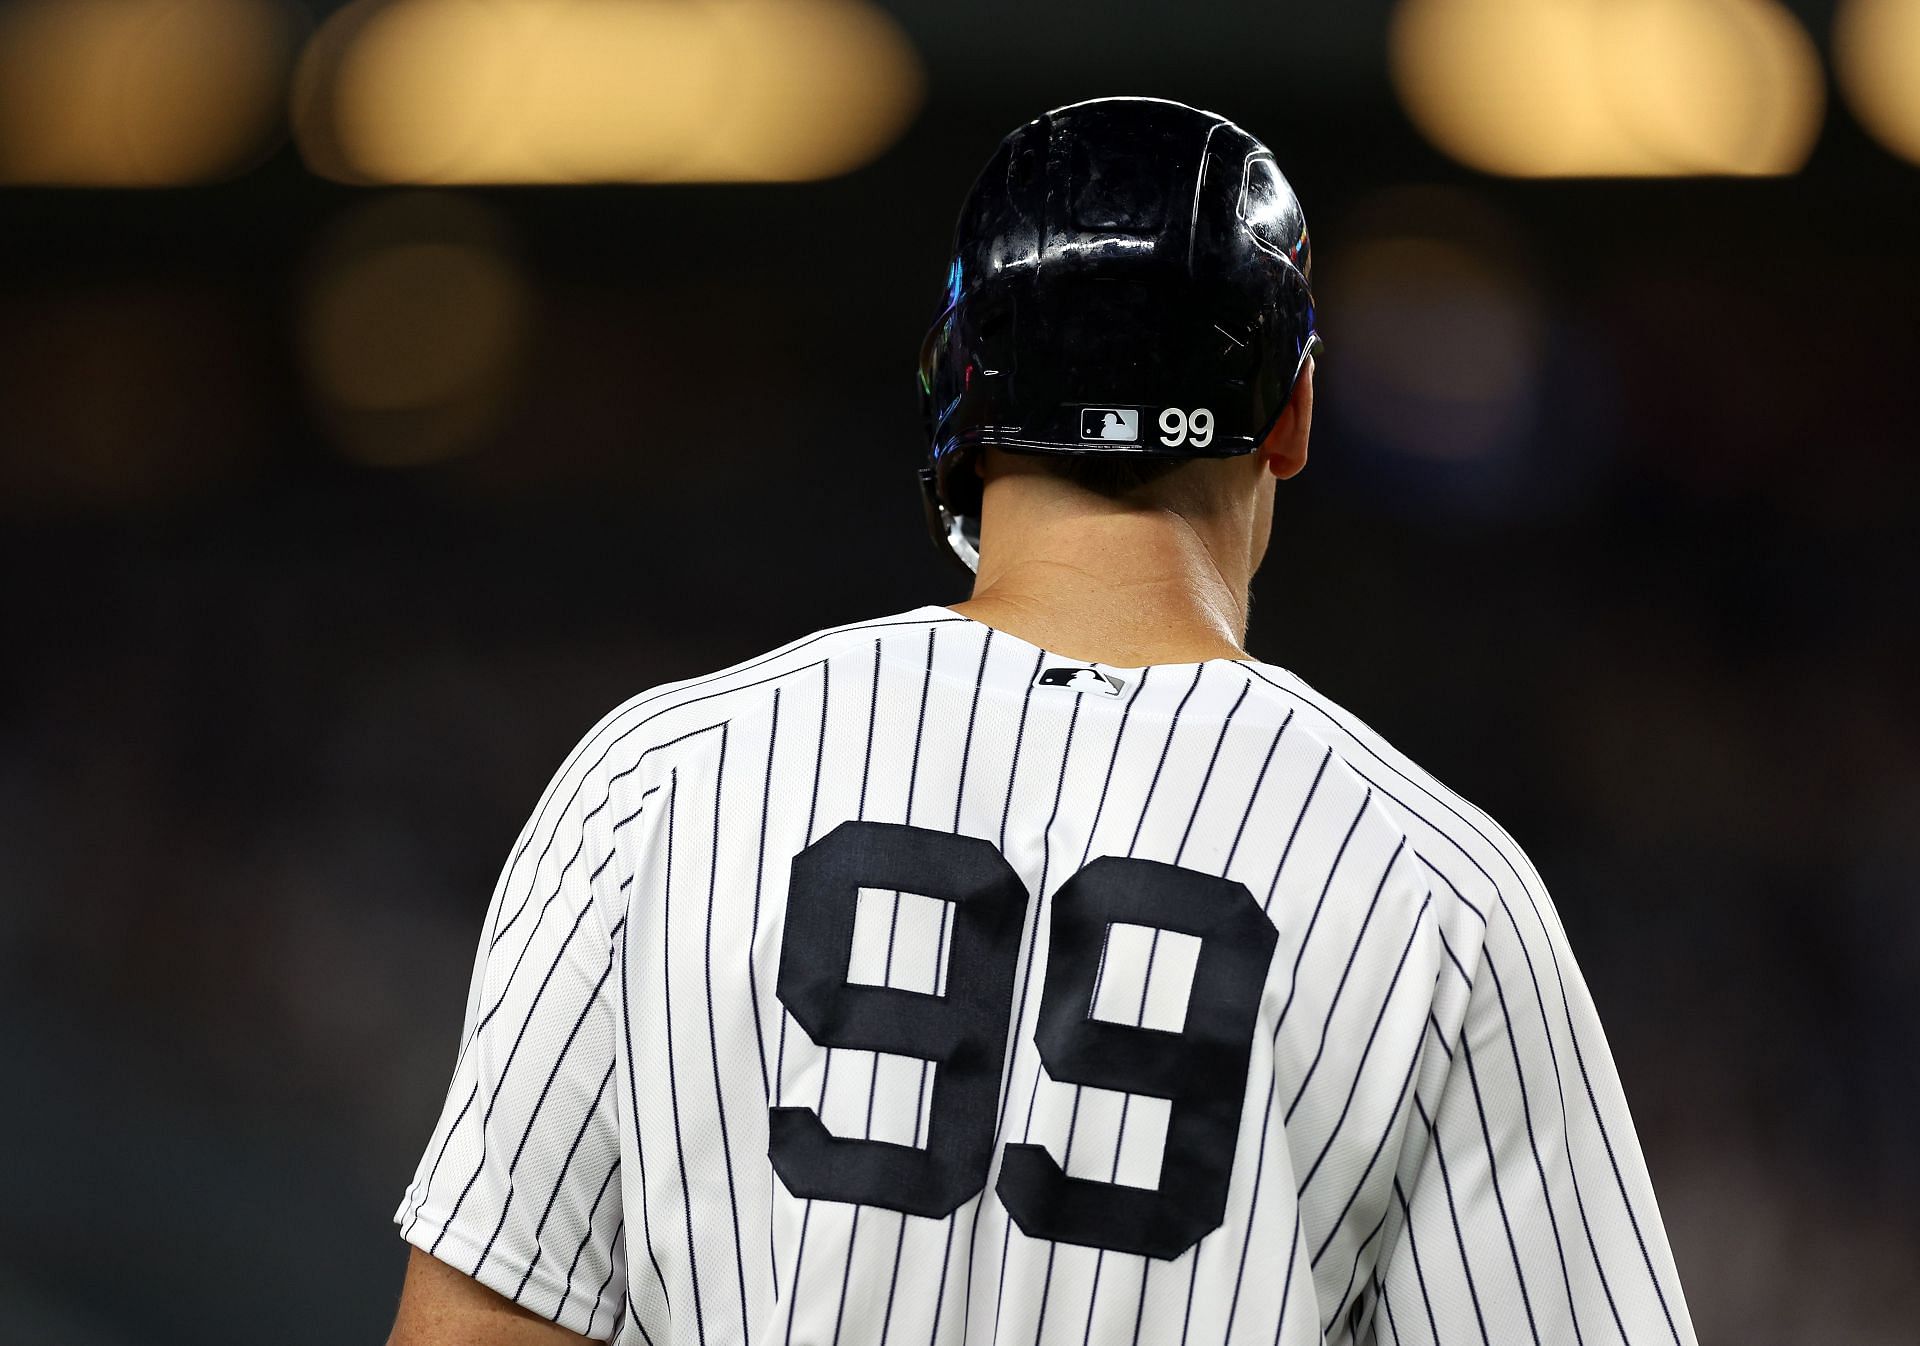 Numbers up: Aaron Judge not the only Yankee in the 90s on his